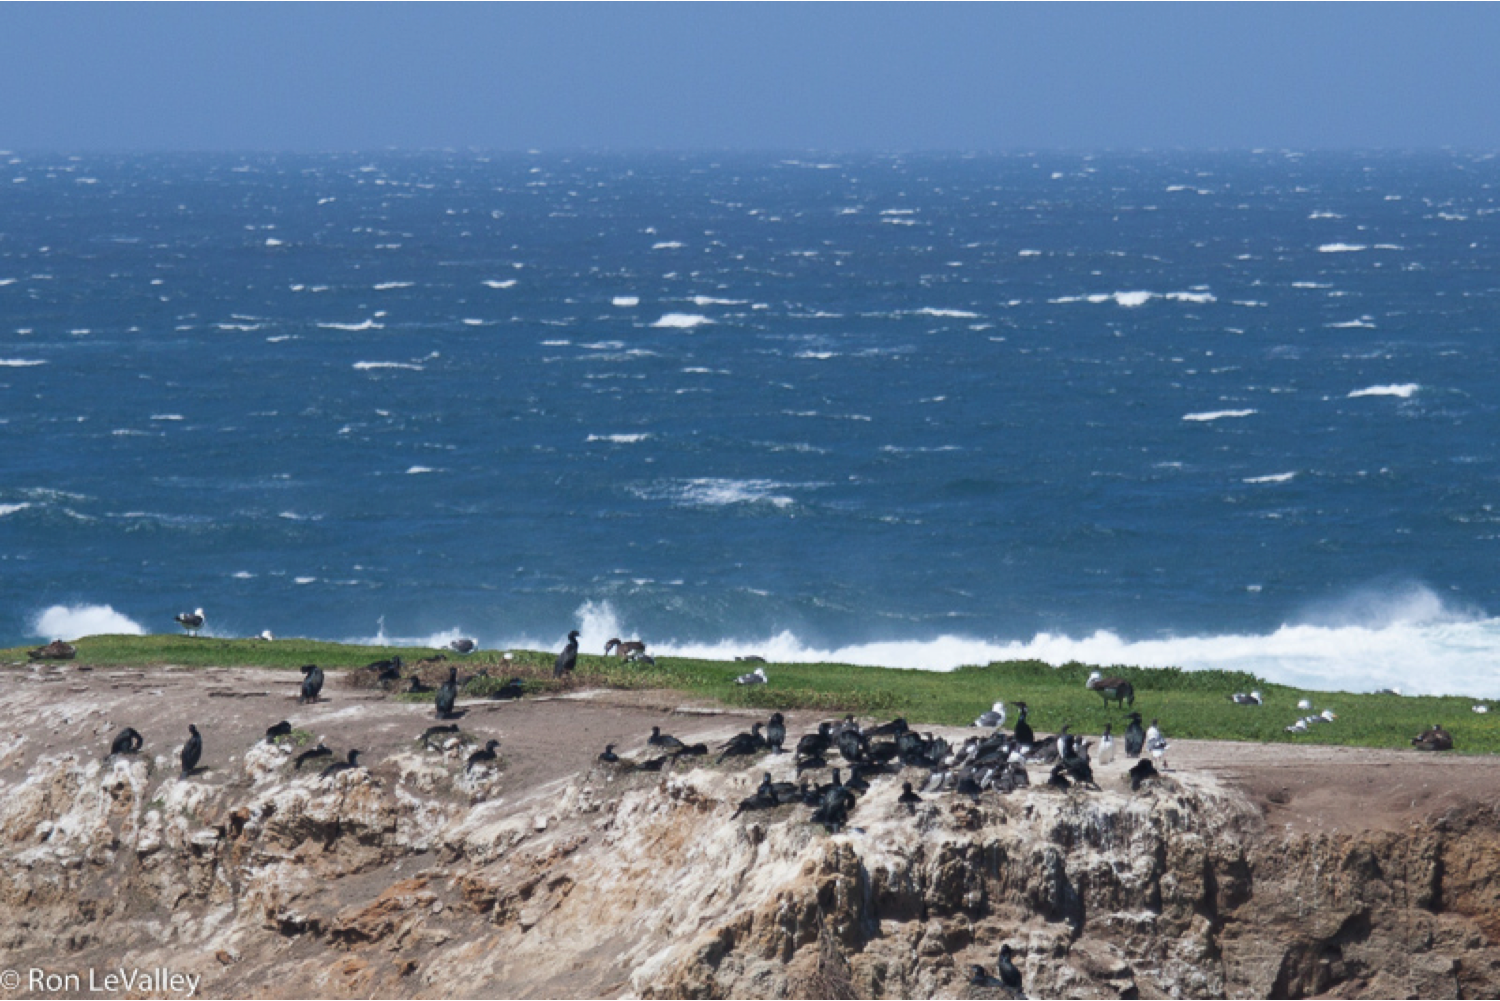 Ocean winds drive upwelling and productivity along certain coastlines. (photo: Ron LaValley)